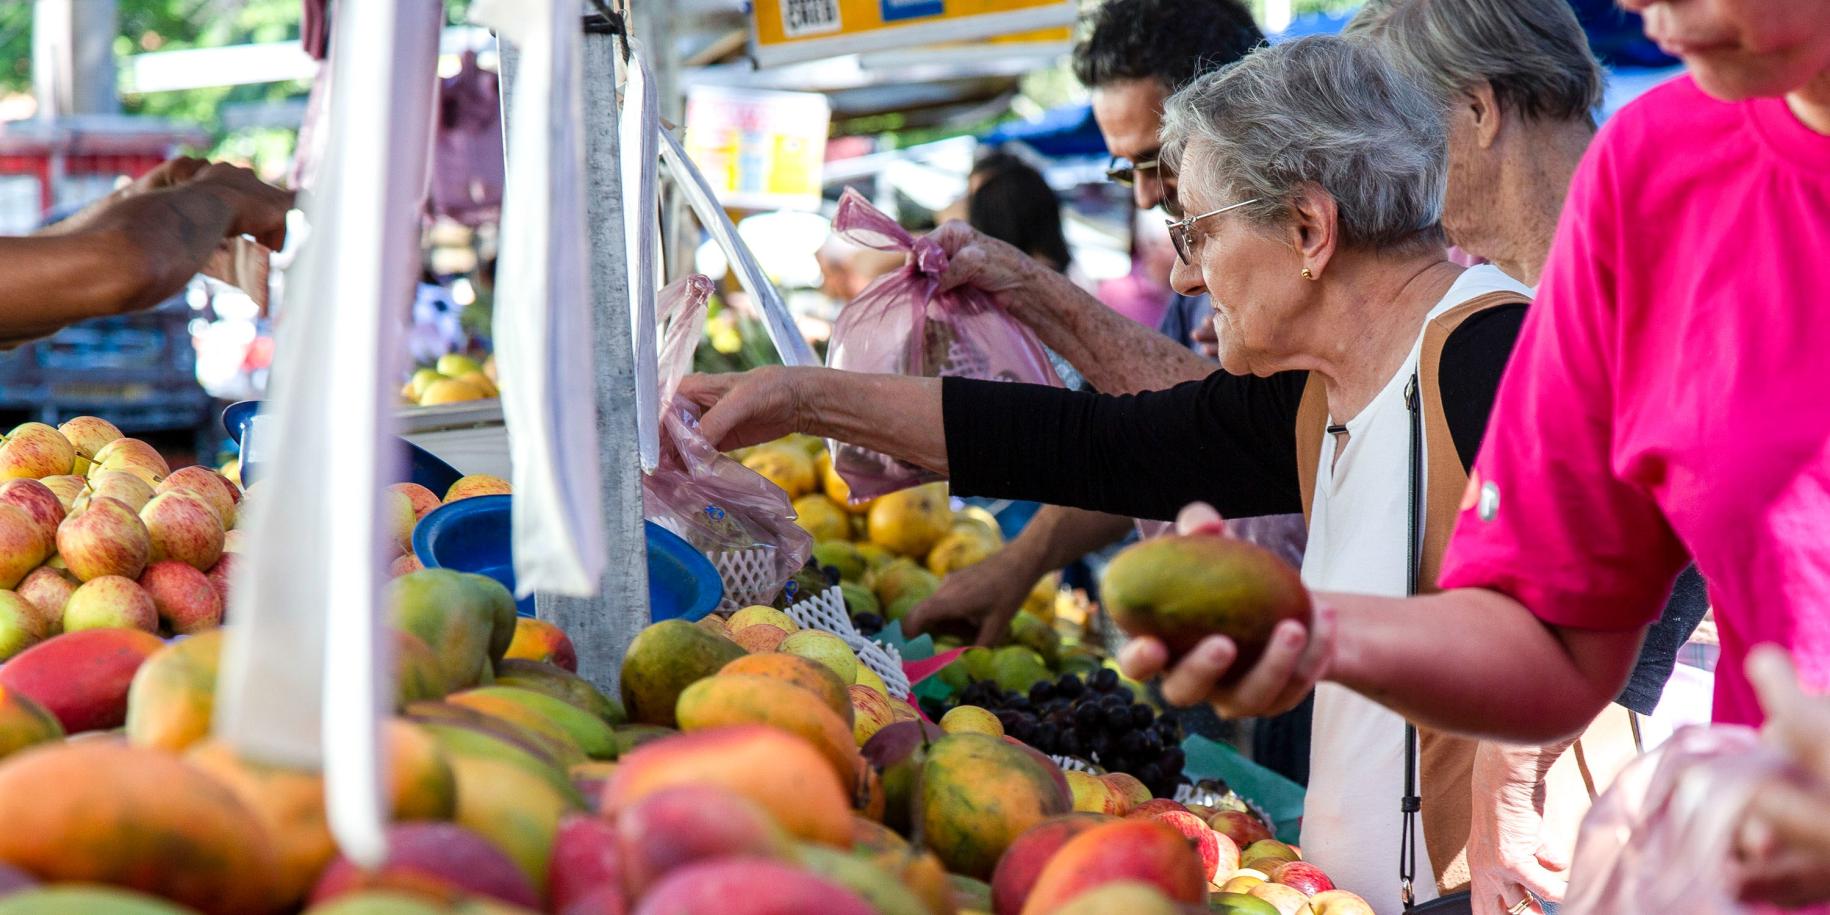 woman in market reaches for bag of pears